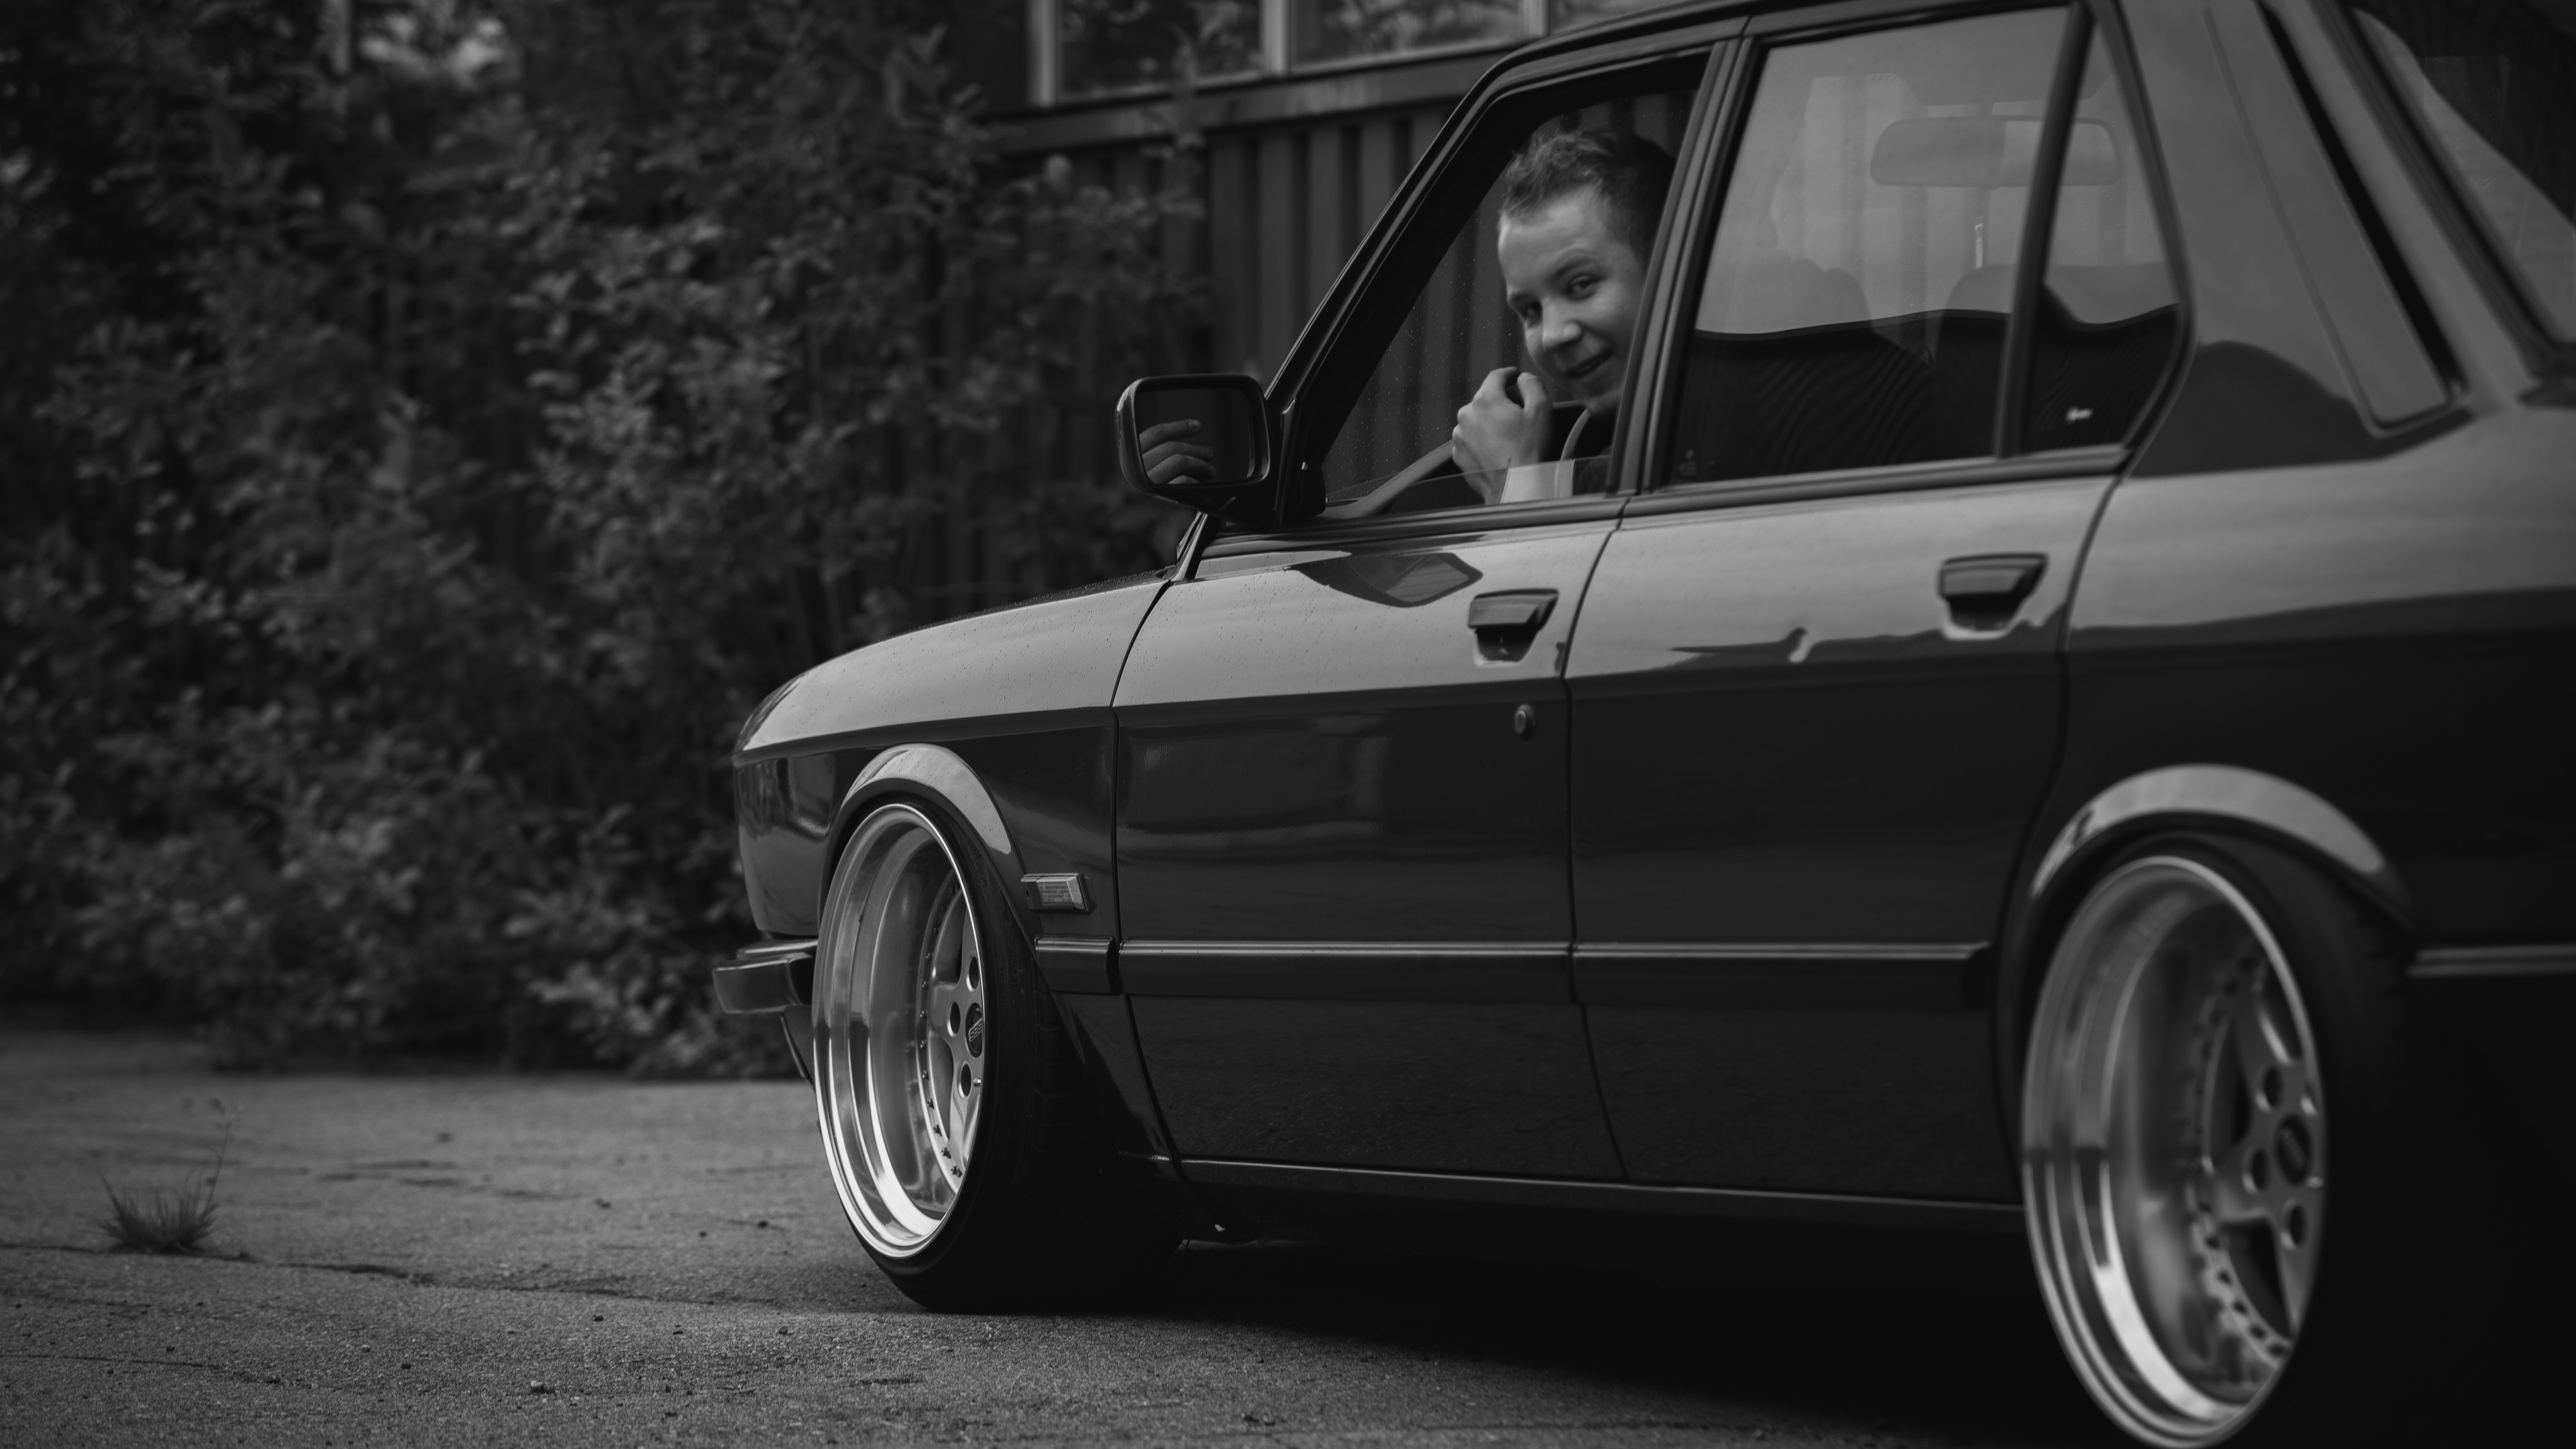 BMW E28, Stance, Stanceworks, Static, Low, Savethewheels, Norway, Summer Wallpaper